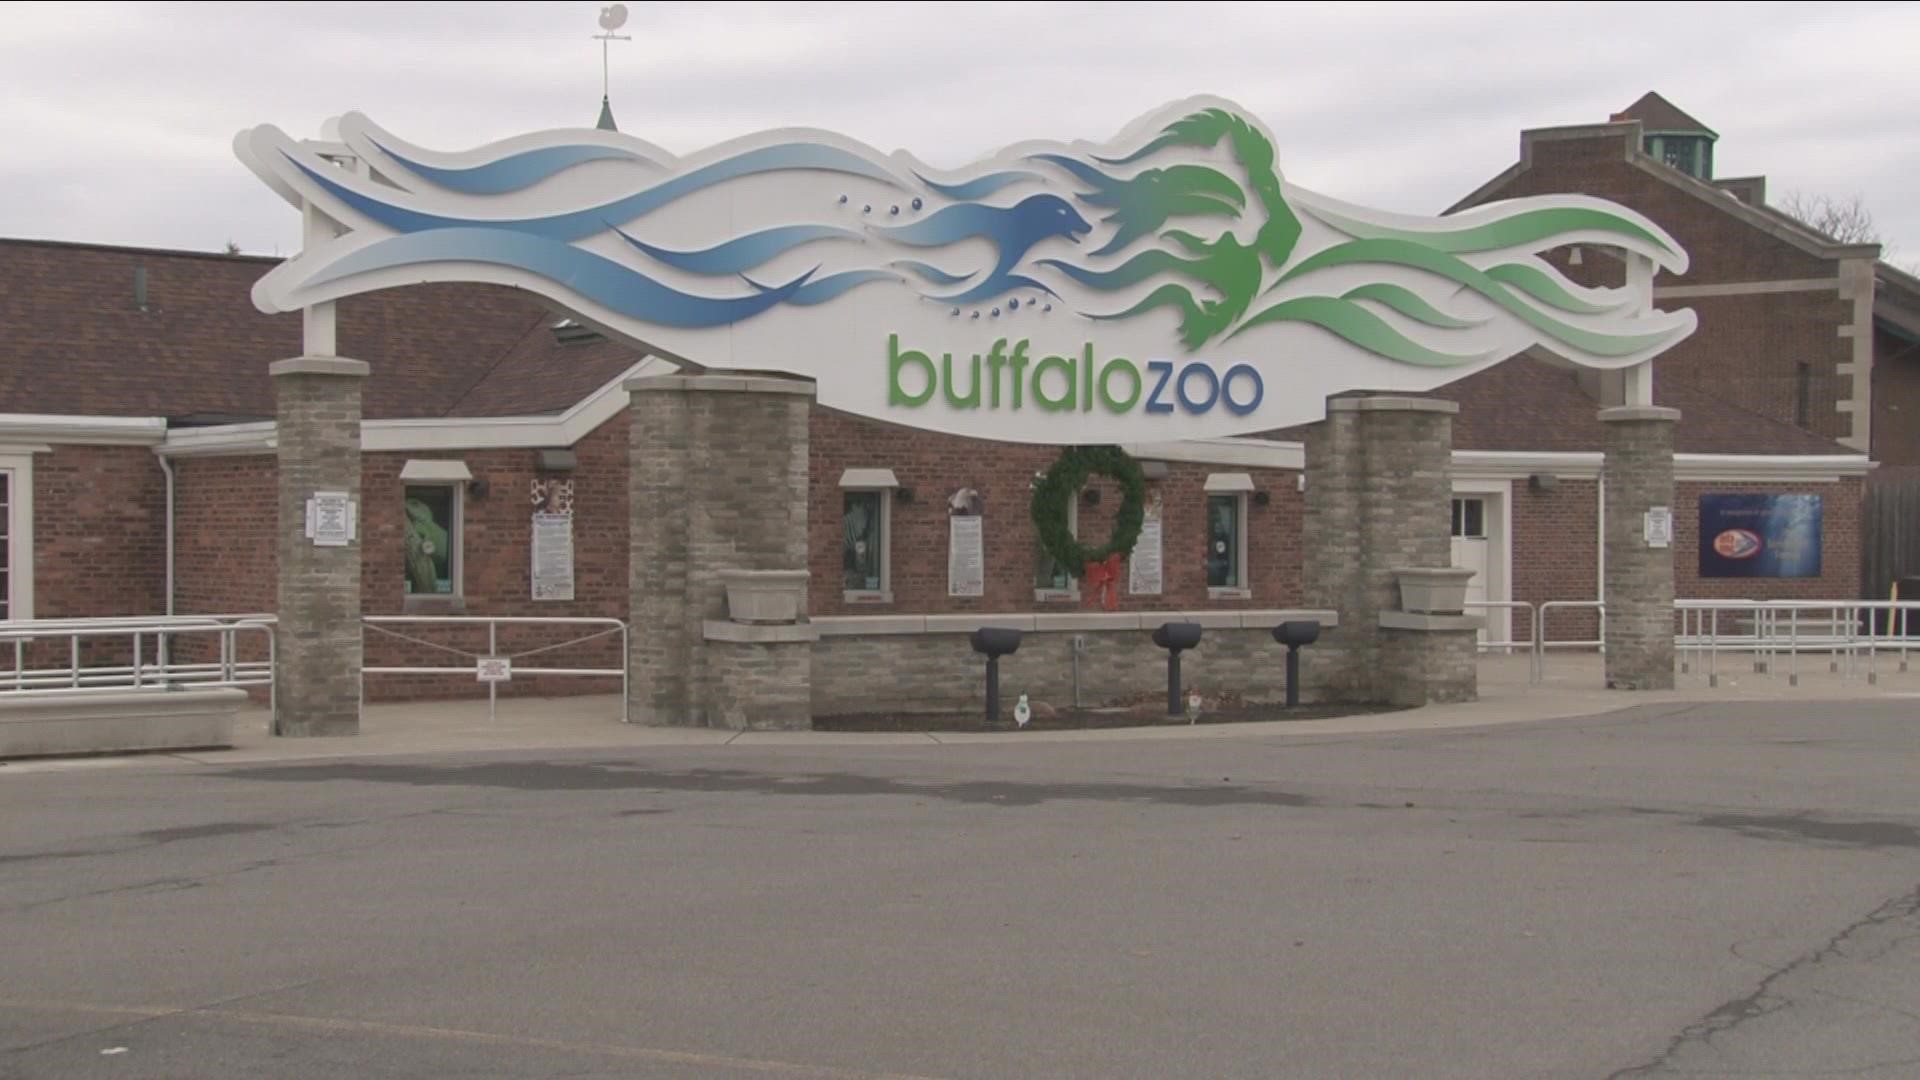 Changes In Leadership At The Buffalo Zoo